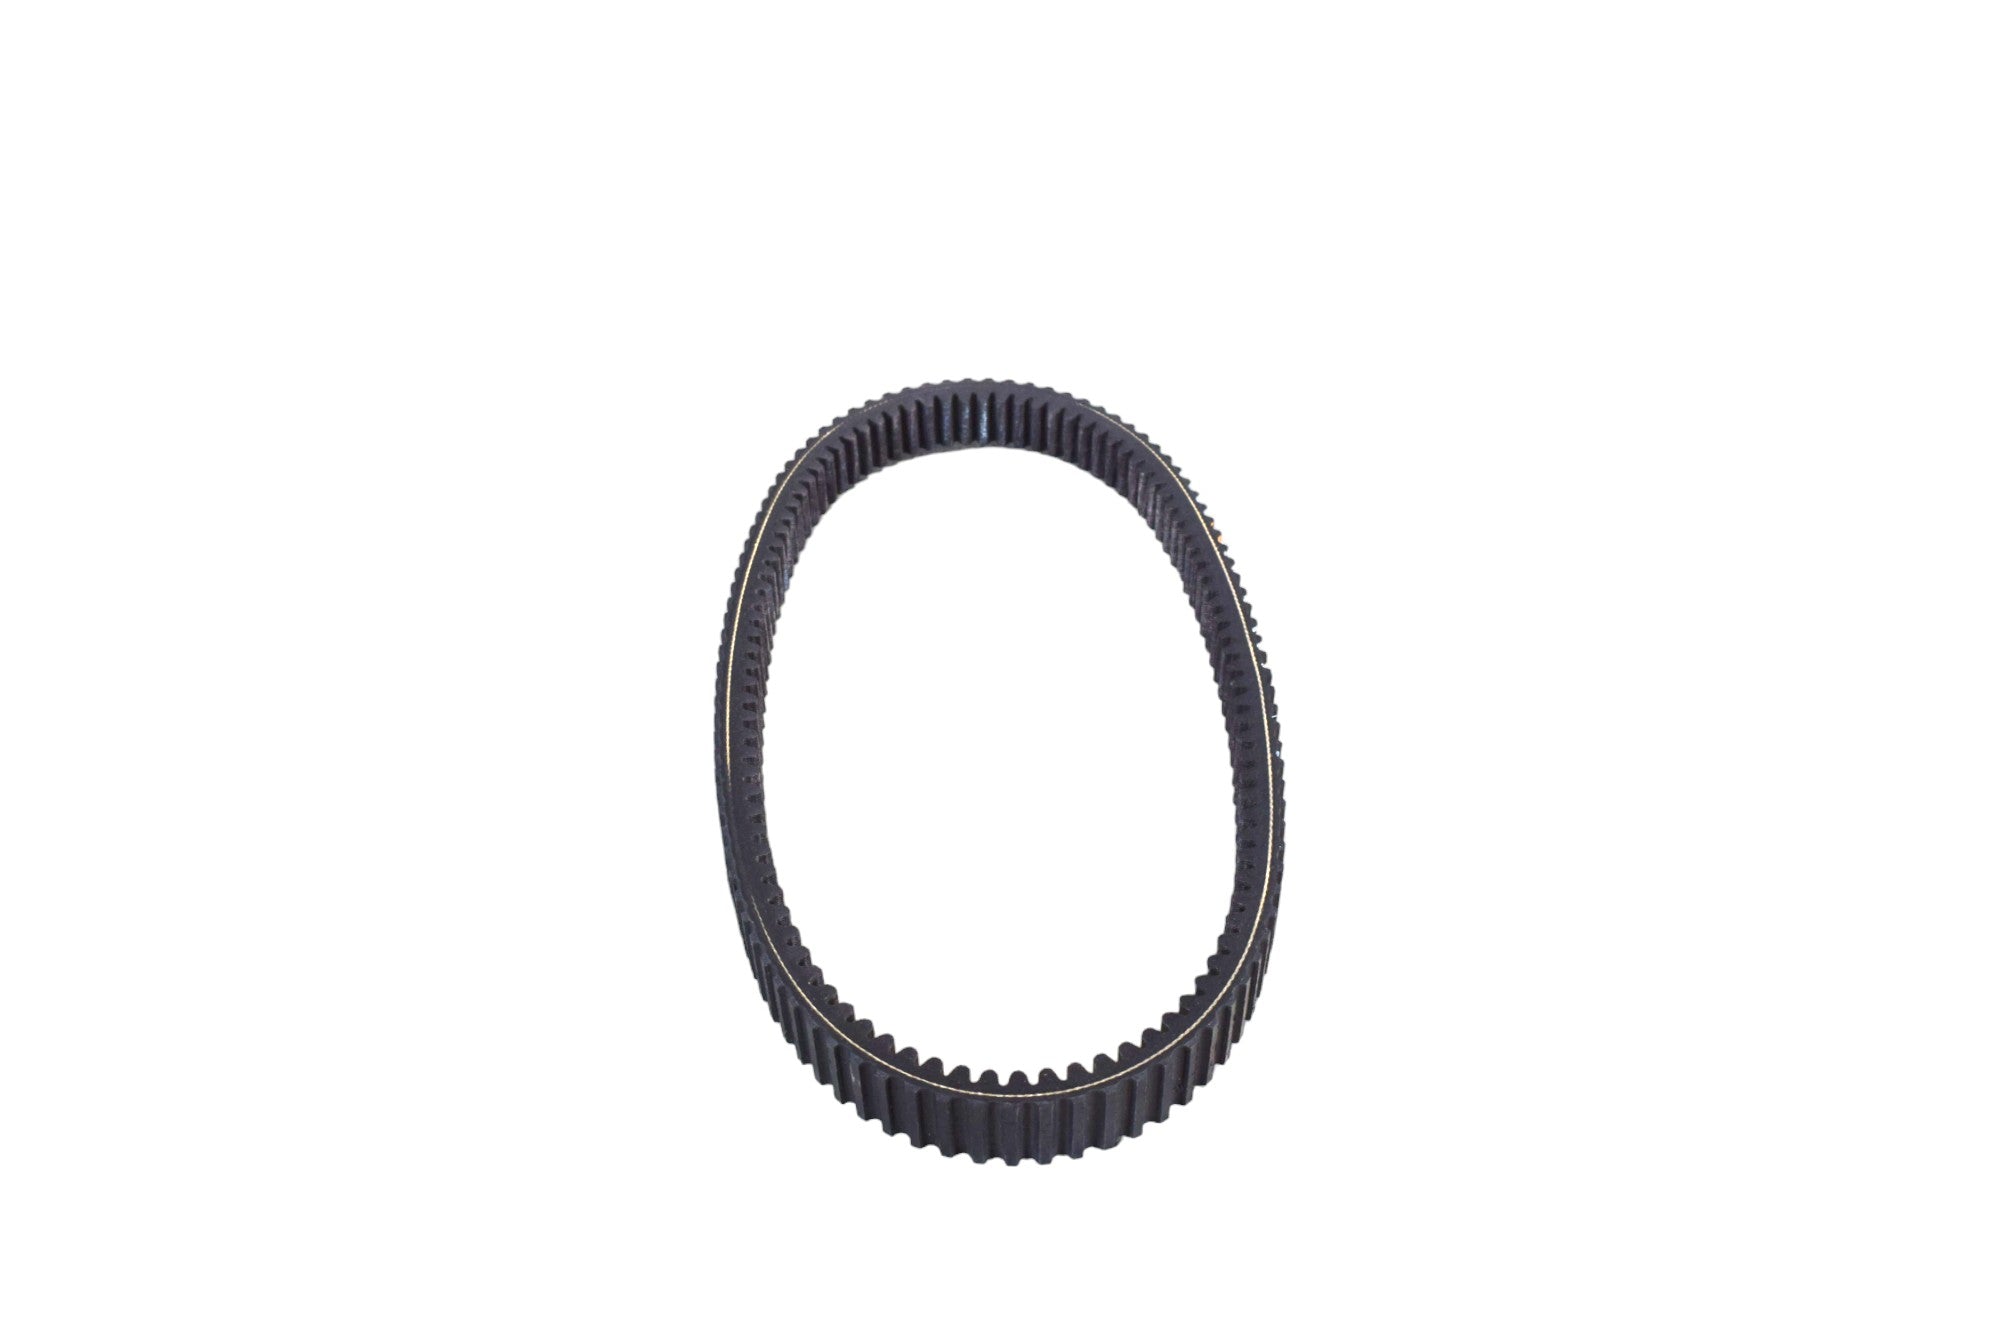 Ultimax UXP448 Drive Belt for Polaris Sportsman, Scrambler and RZR OEM Replacement for 3211123, 3211130, 3211153, 3211160, 211203 (Made in USA)